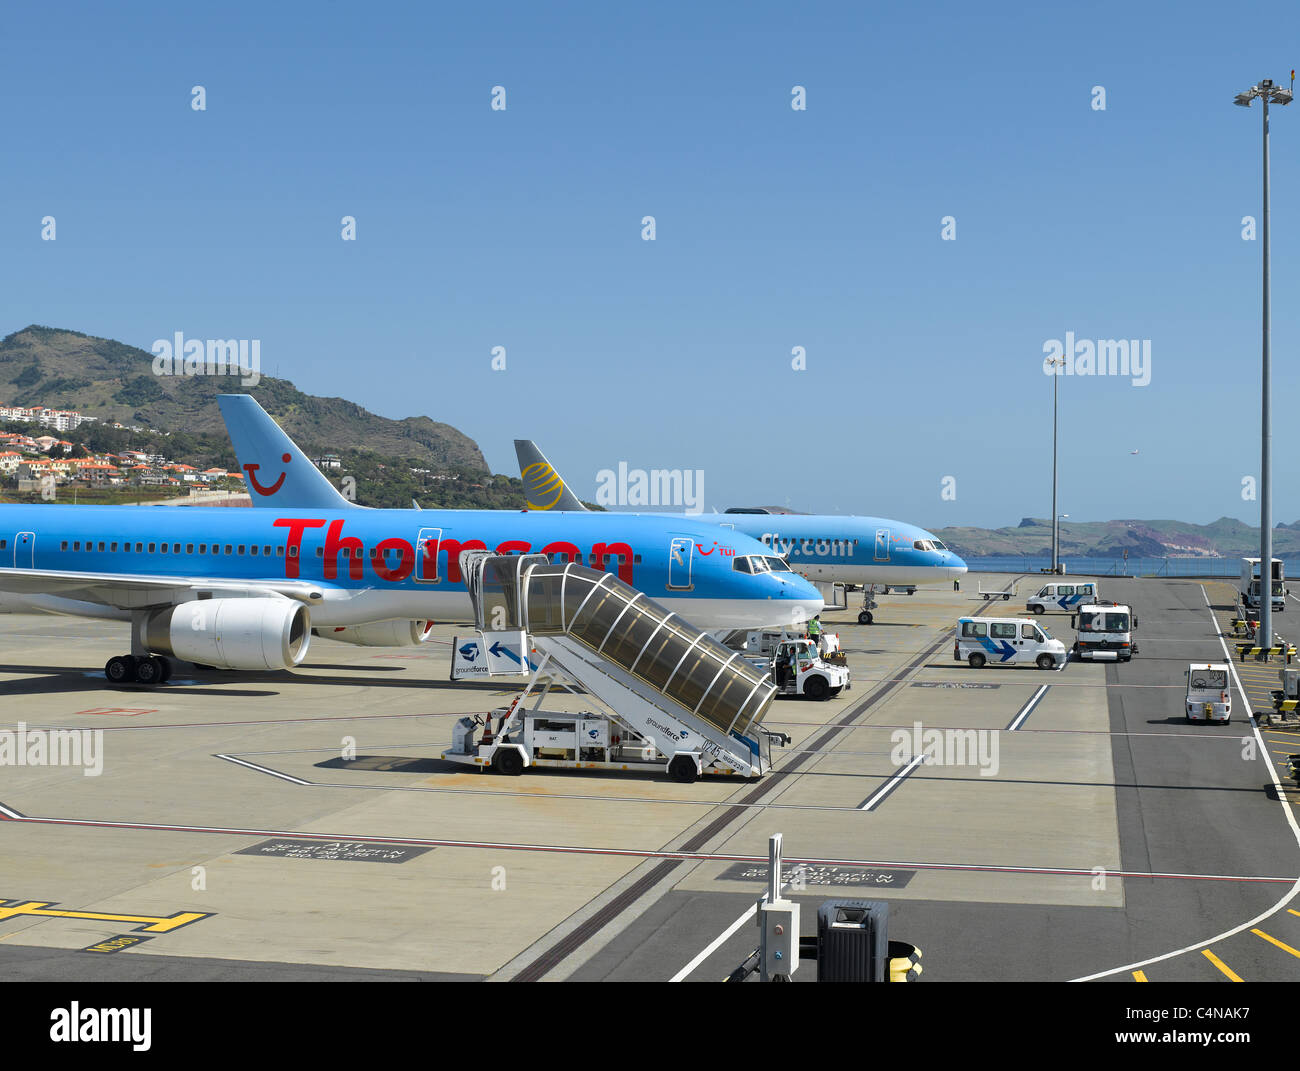 Thomson plane airplane planes airplanes parked at Funchal airport Madeira Portugal EU Europe Stock Photo